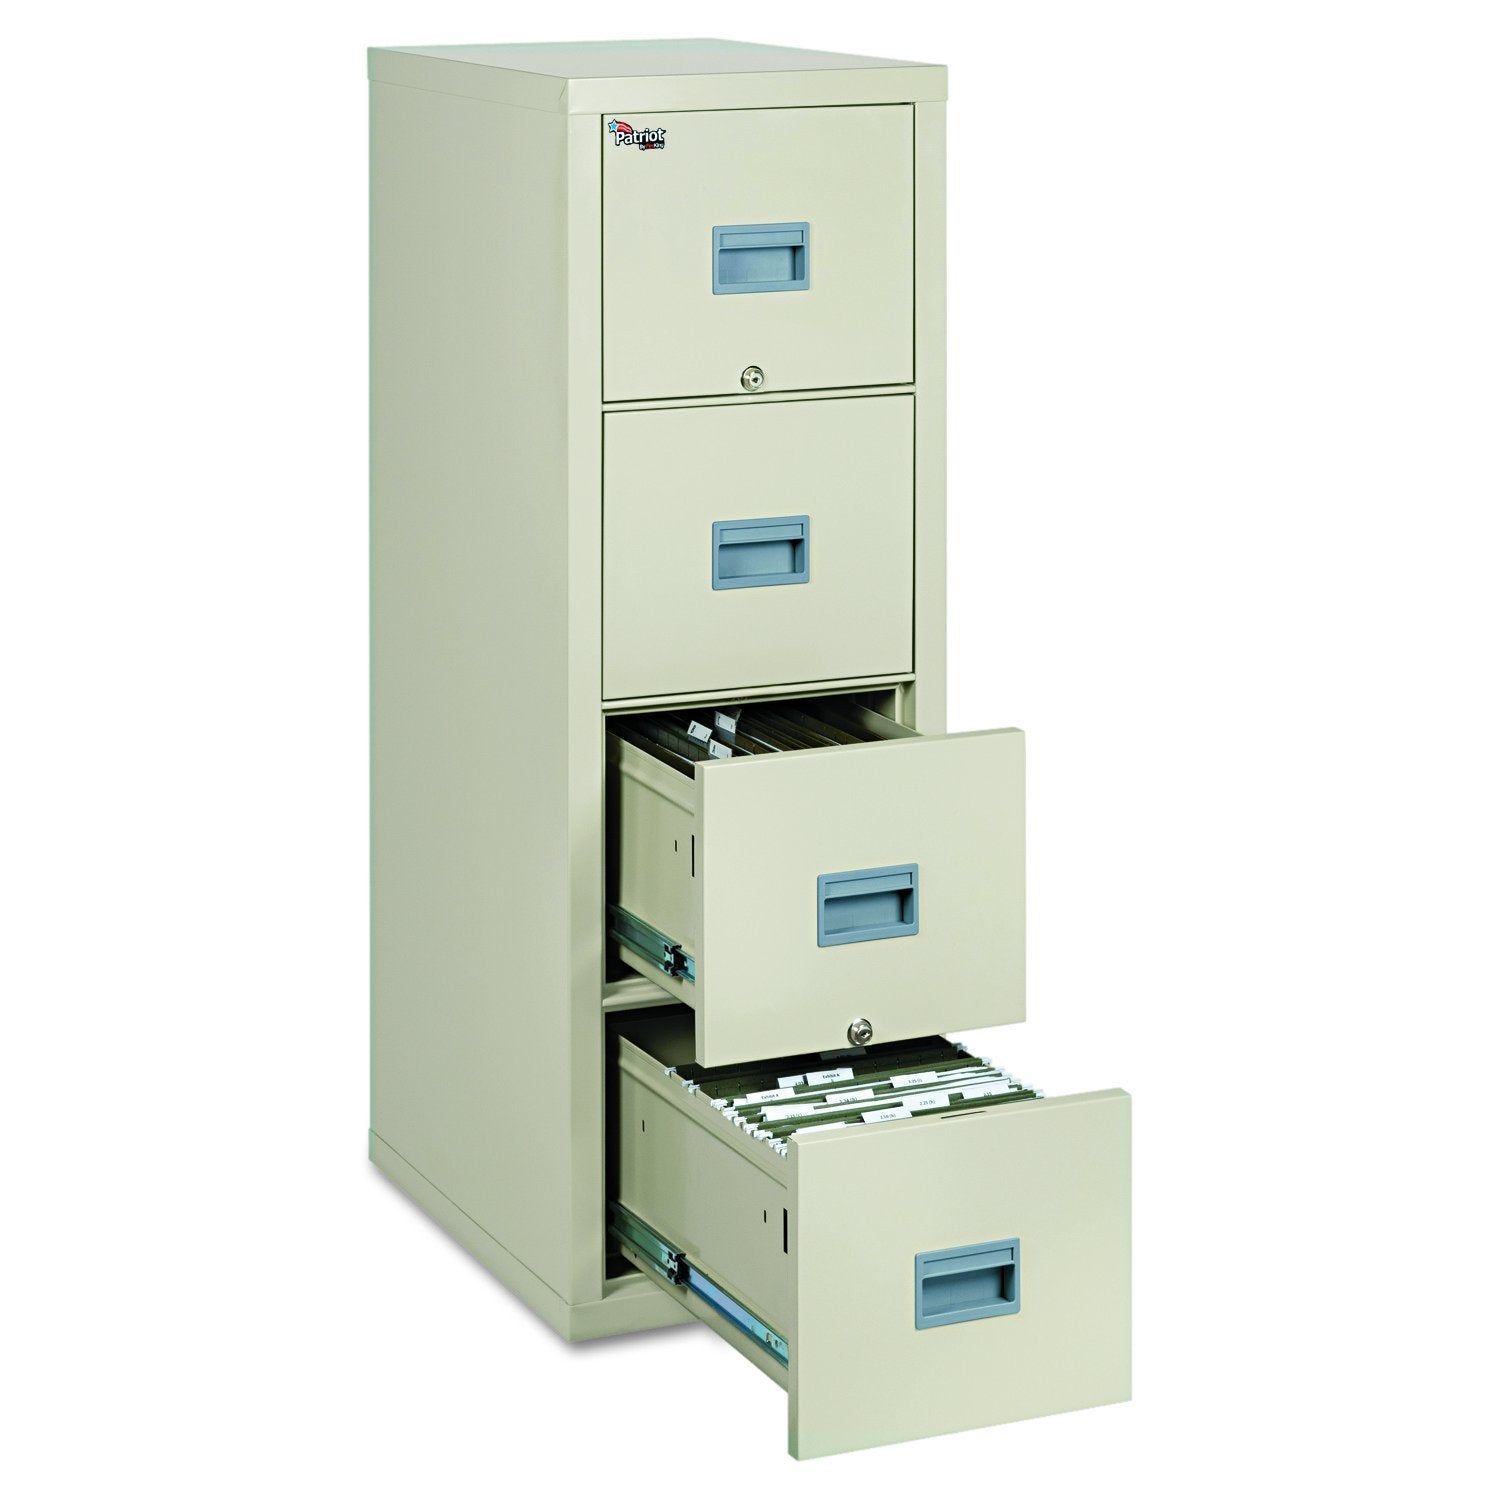 Discover fireking patriot 4p1825 cpa one hour fireproof vertical filing cabinet 4 drawers deep letter or legal size 18 w x 25 d parchment made in usa